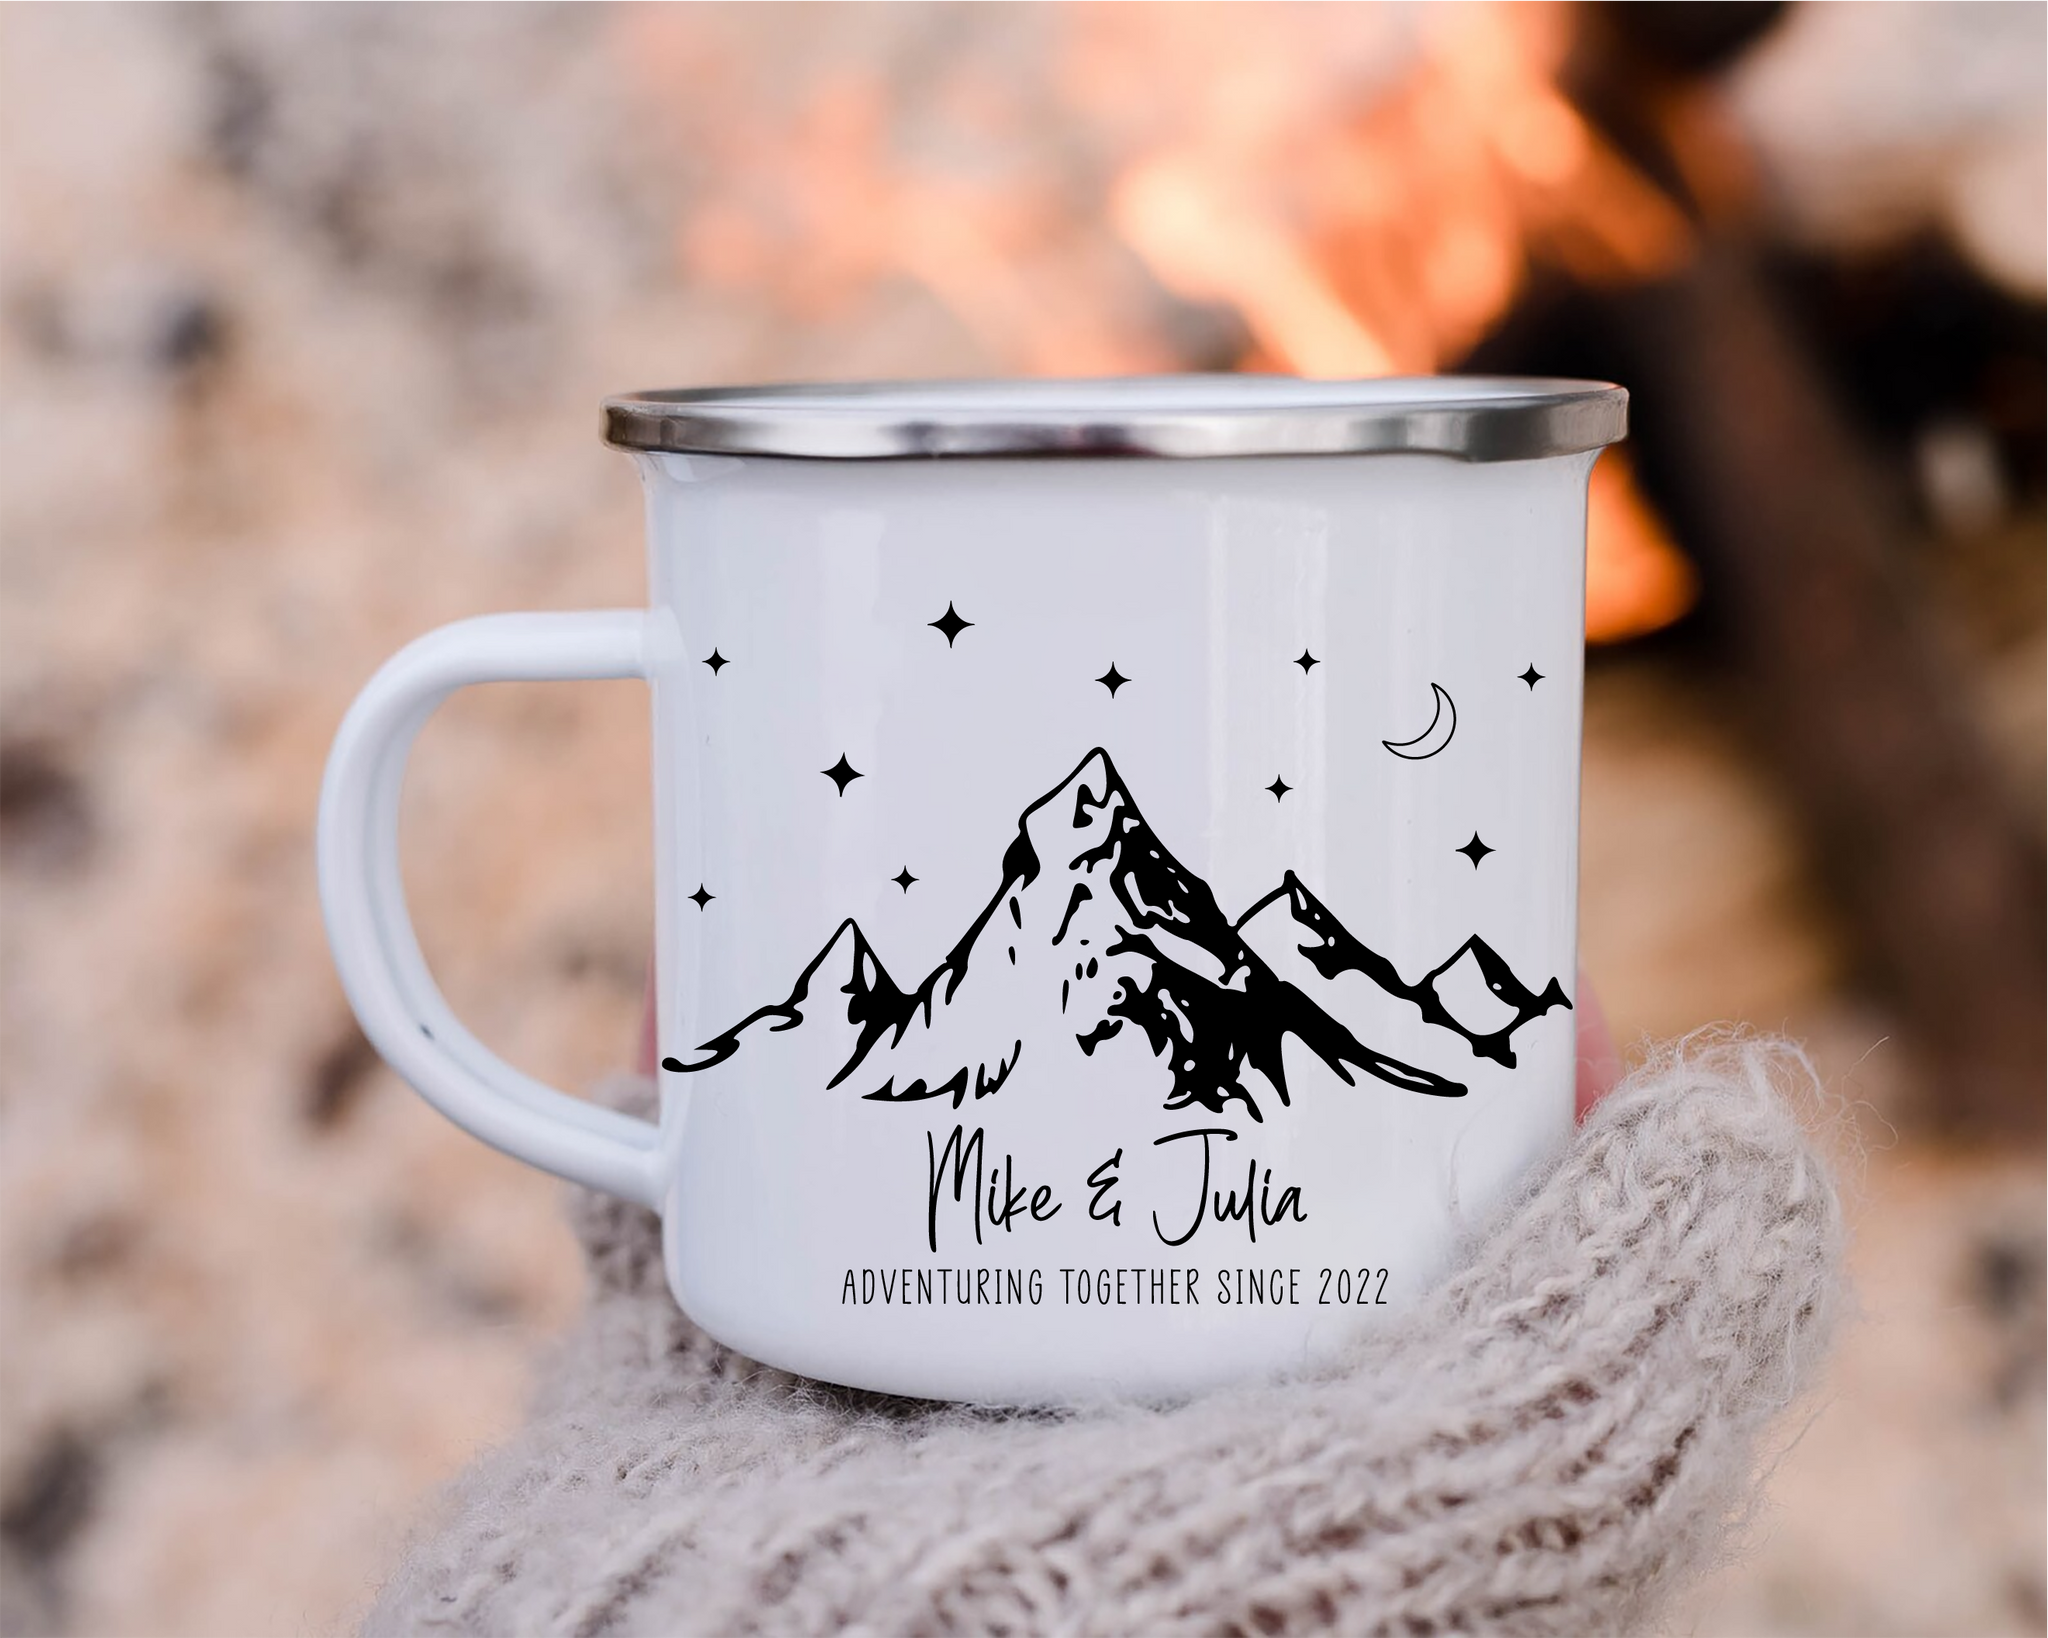 Personalized Weekend Forecast Camping Drinking White Stainless Steel Travel Camp  Mug w lid - Personalize It For You! - Personalize It For You!